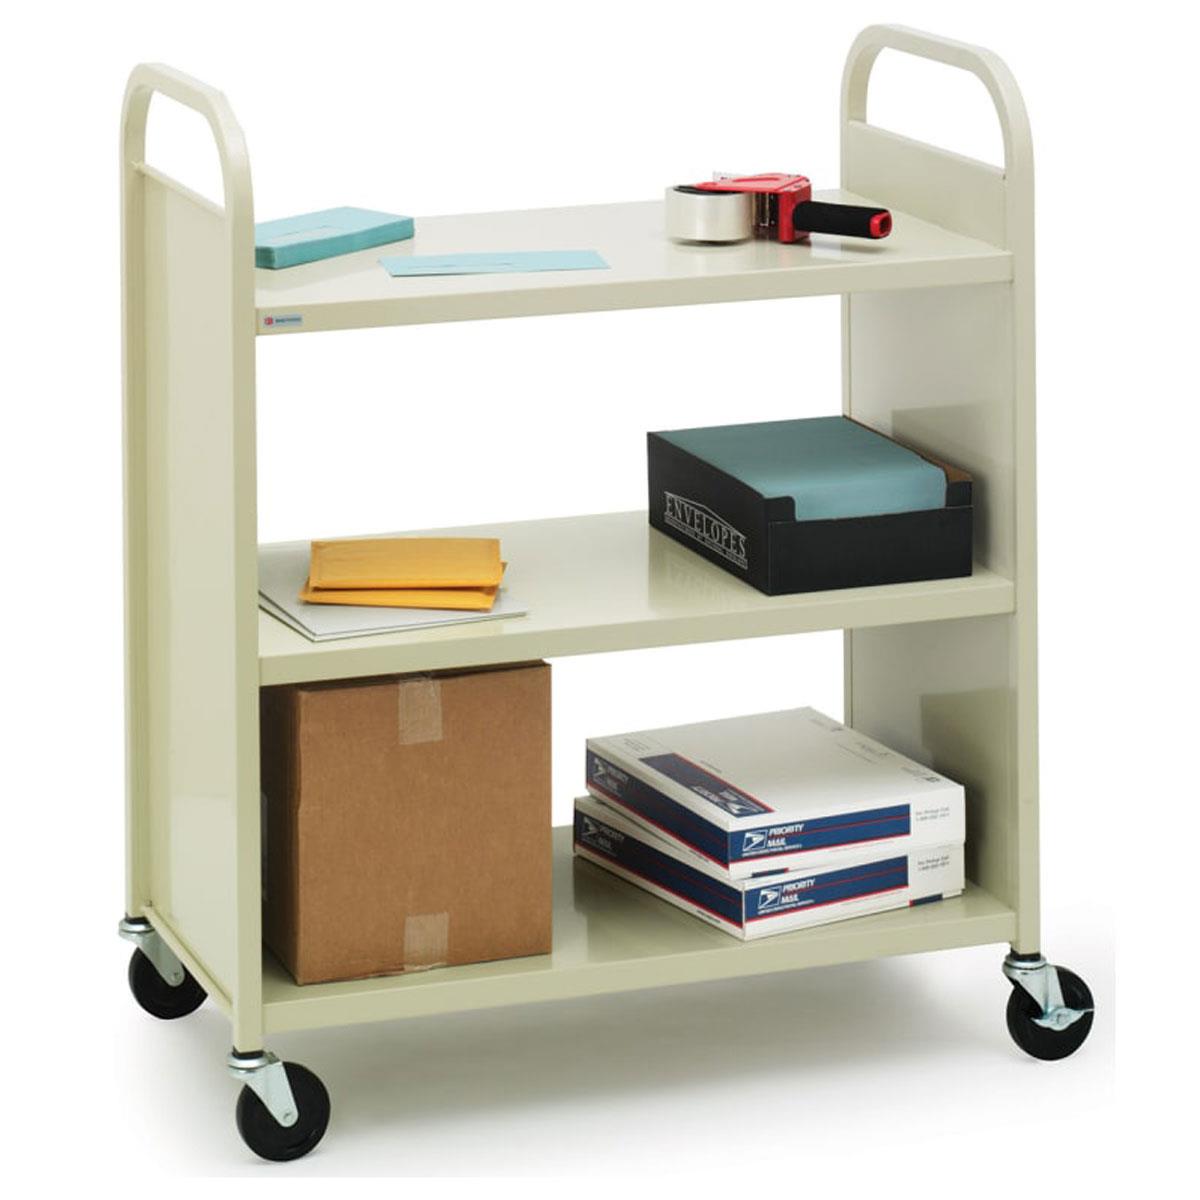 Image of Bretford Mobile Book and Utility Truck with 3x Flat Shelf